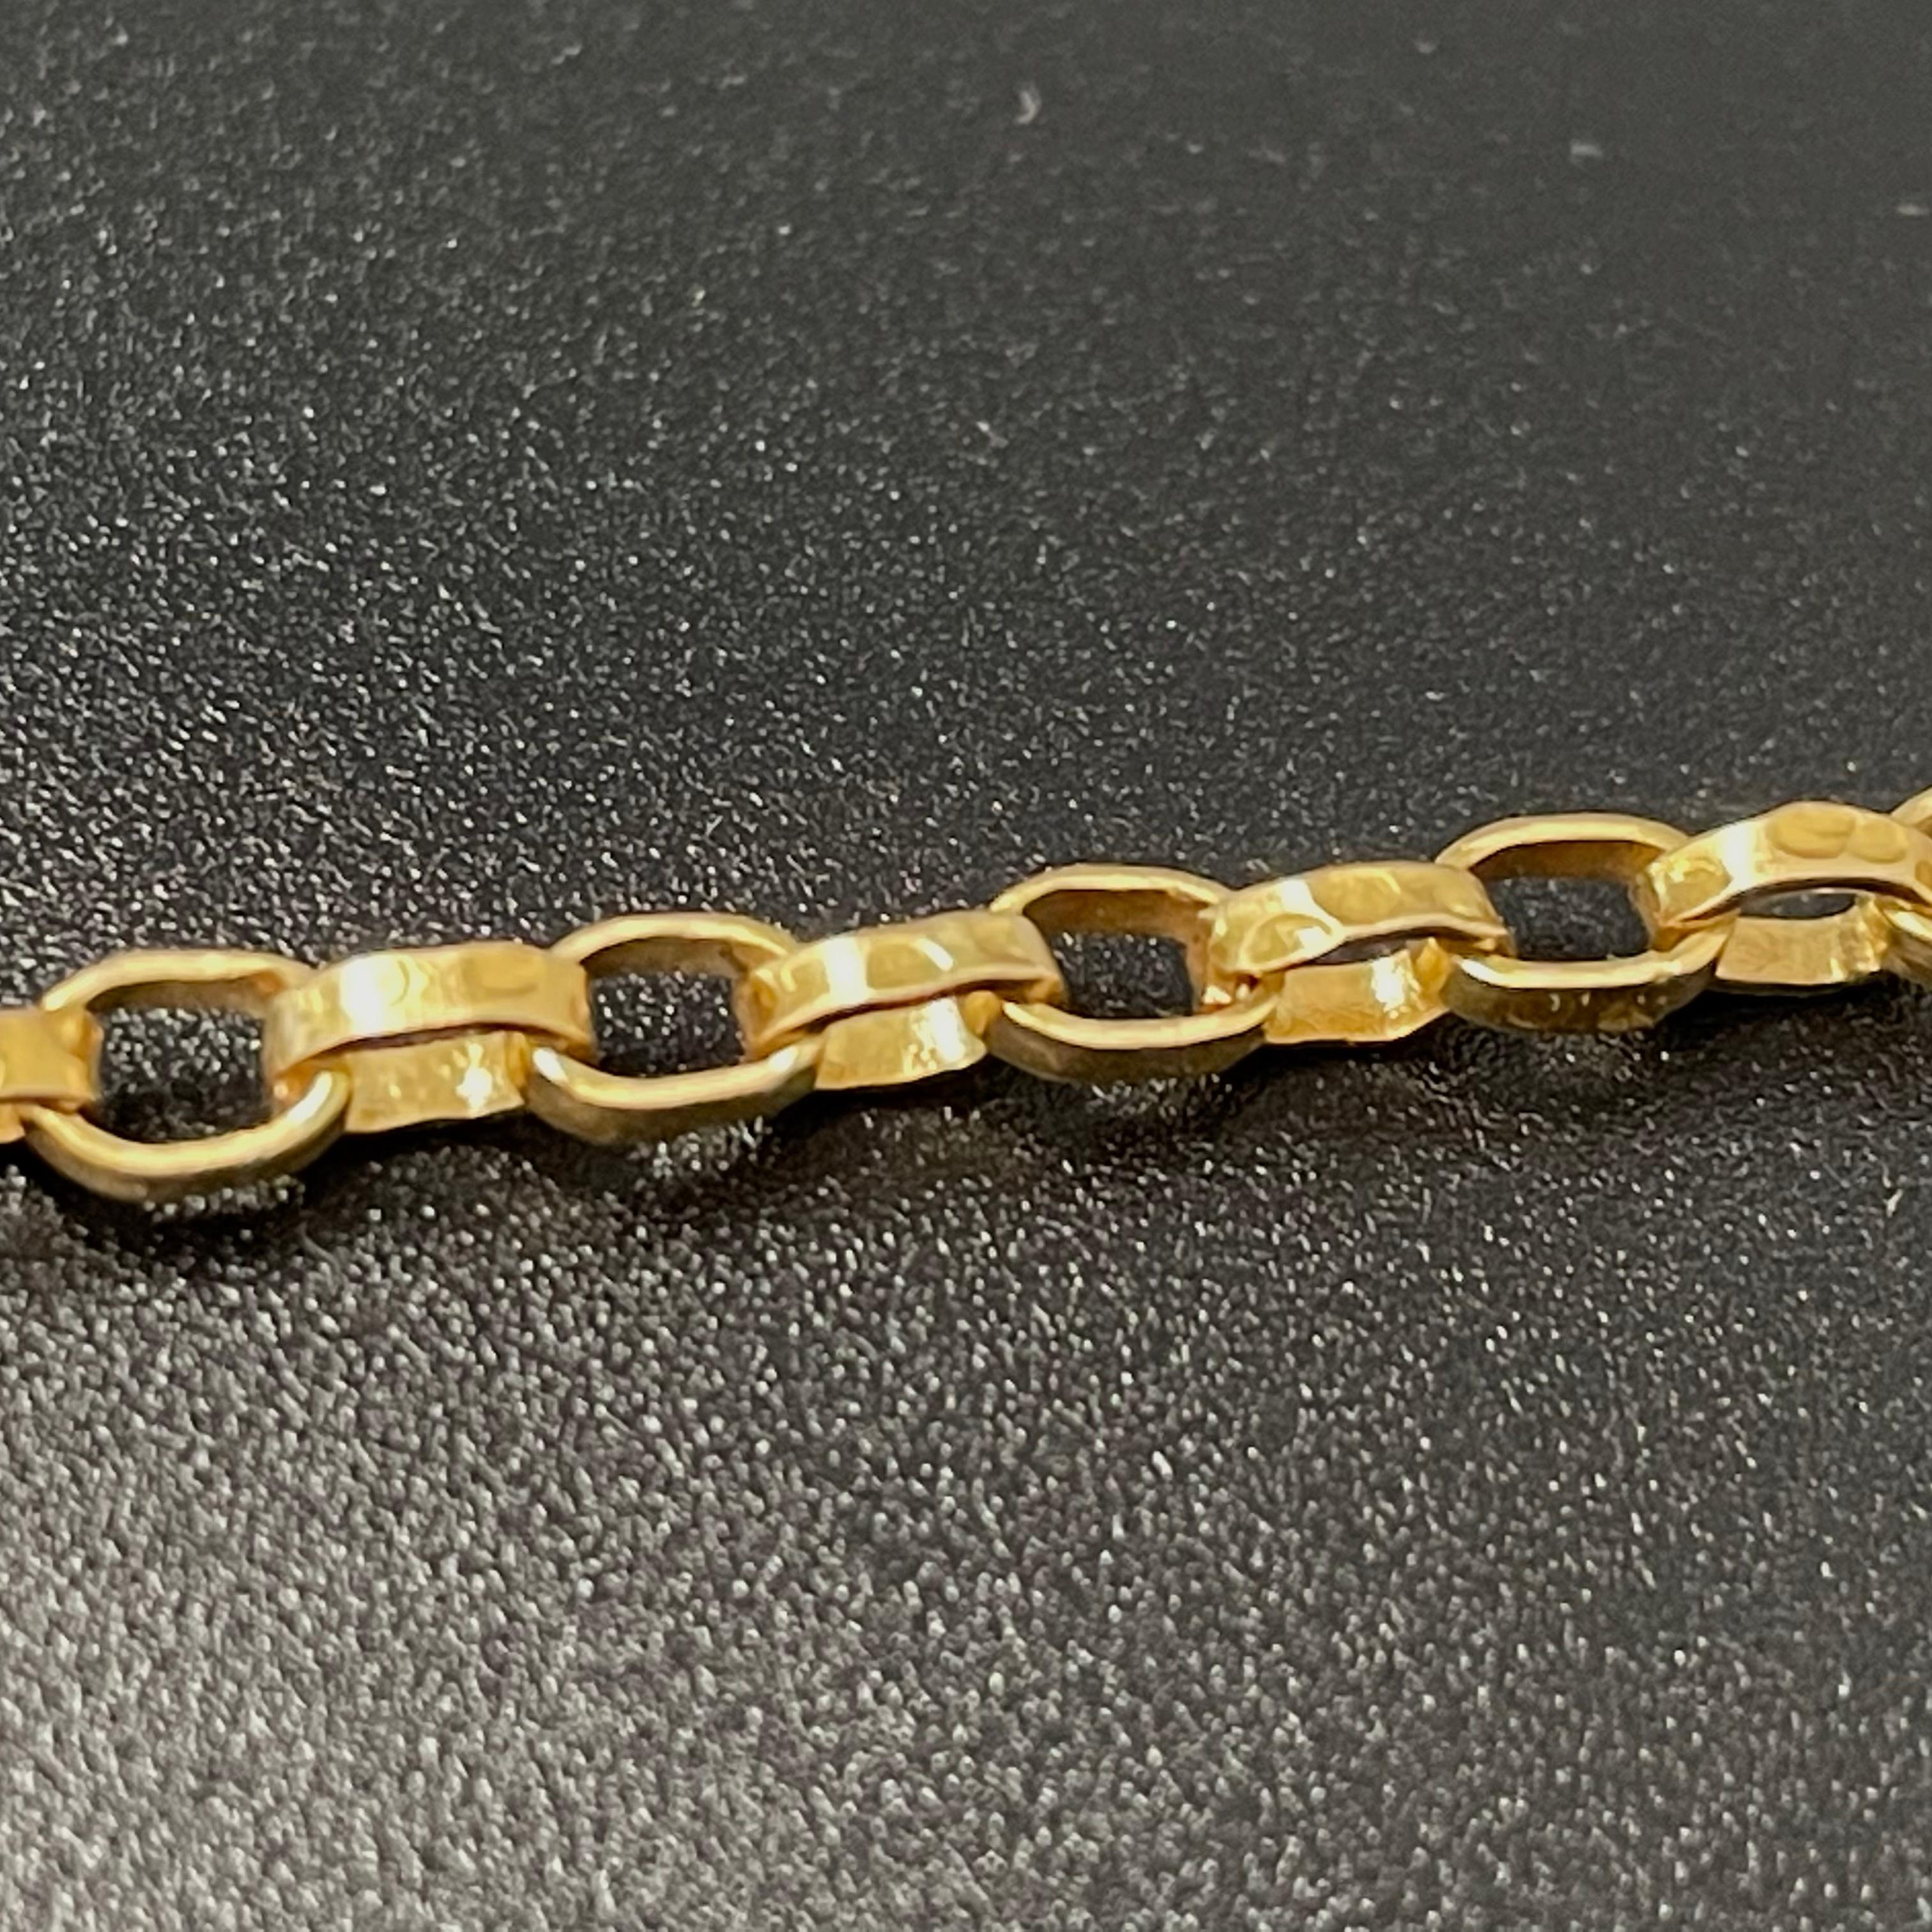 A unique handmade hammered organically textured chain with matt-finish provides a beautiful way to display your treasured pendants.  1.3 mm width.  Also available in 20 and 18 inch. If you want one of those lengths, please message. Note* there are